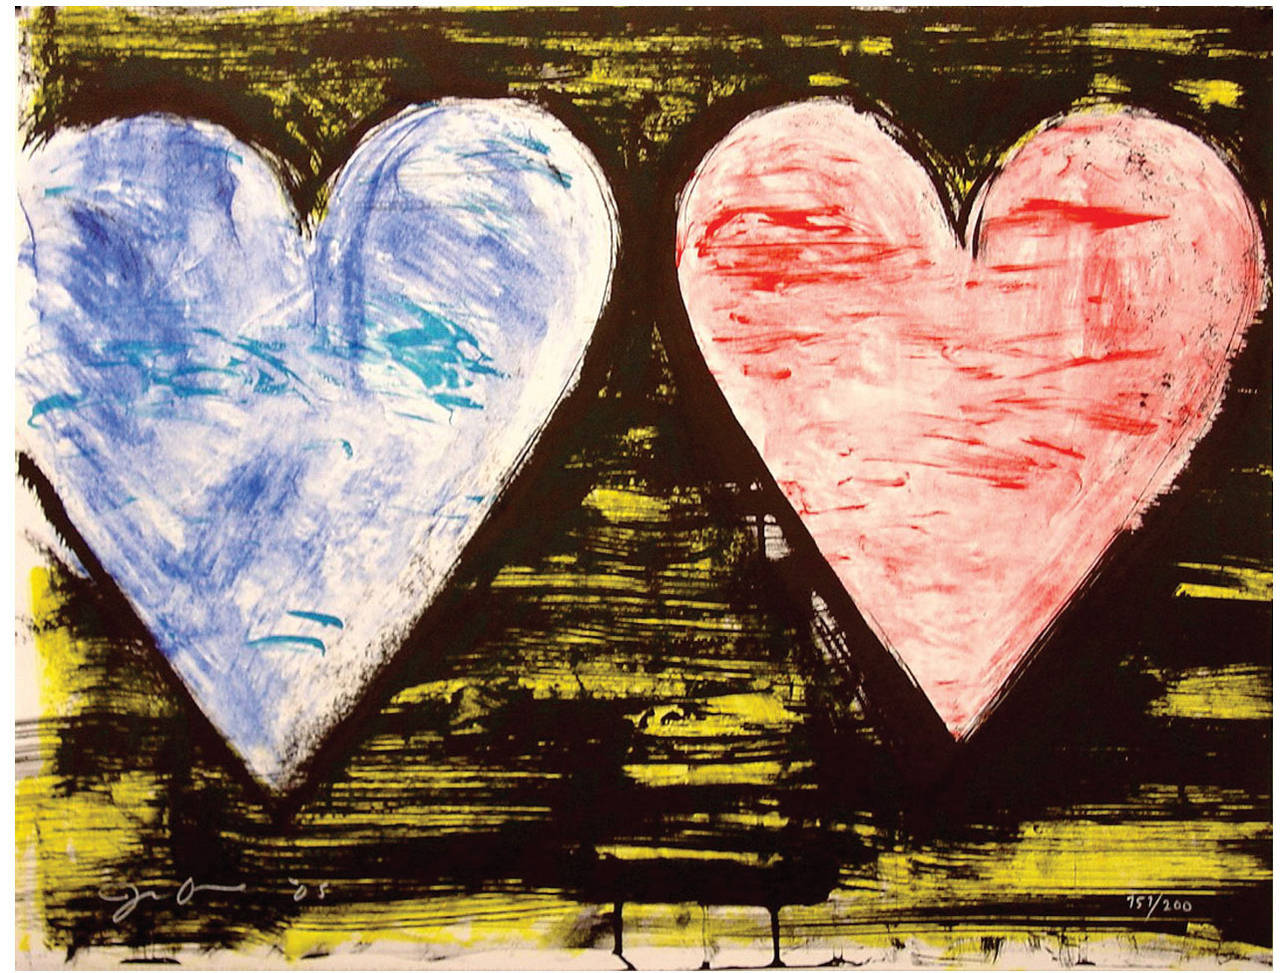 Two Hearts at Sunset, edition 32/200 - Print by Jim Dine